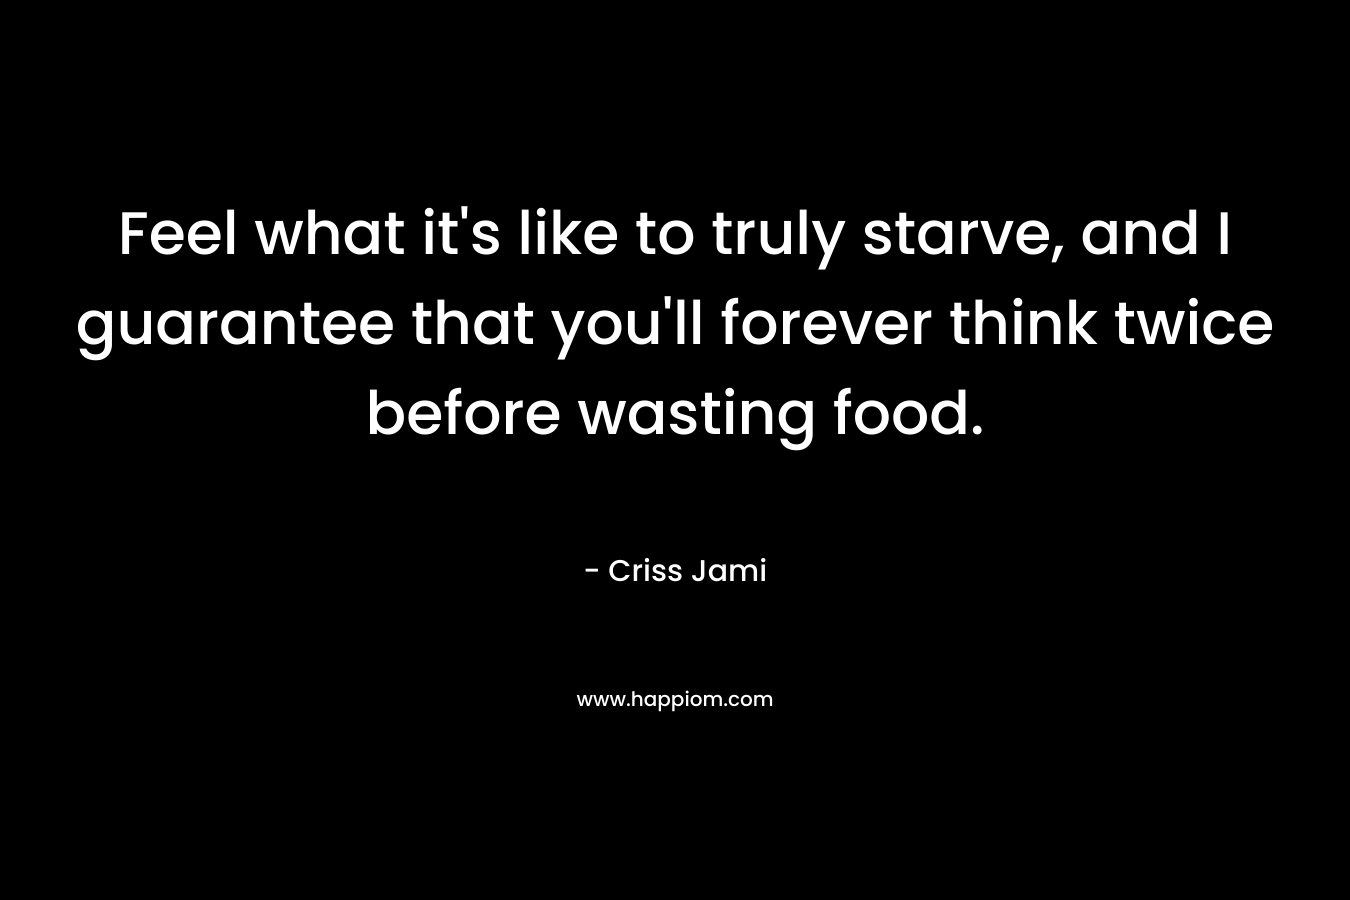 Feel what it's like to truly starve, and I guarantee that you'll forever think twice before wasting food.